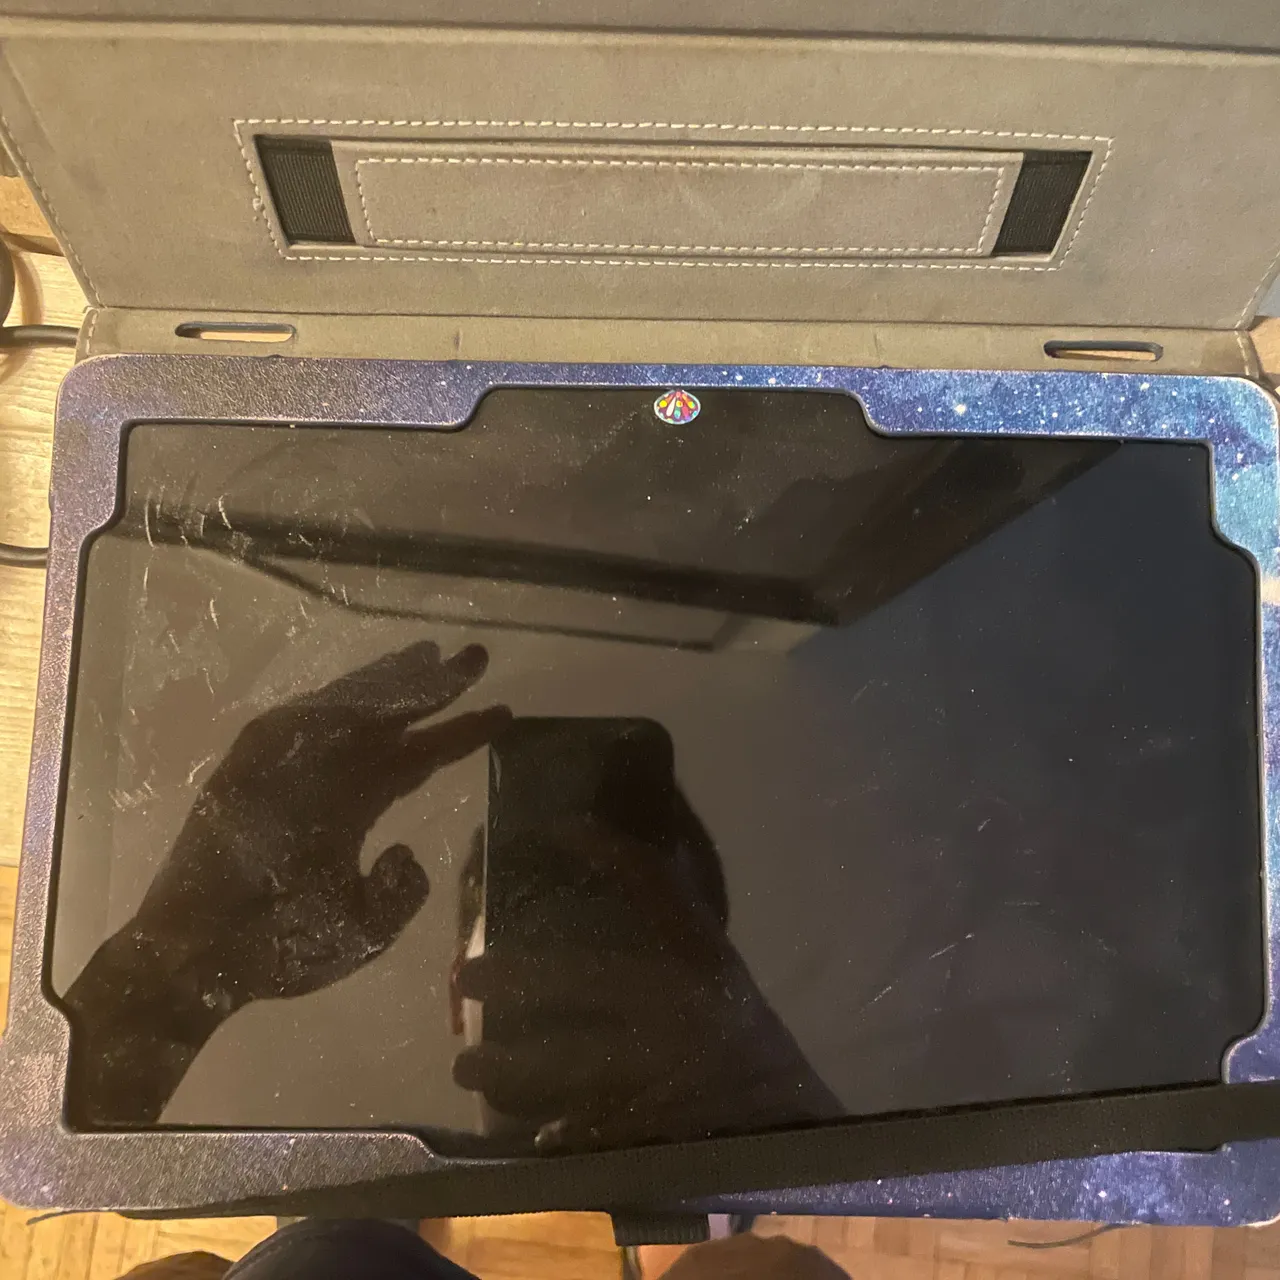 Tablet from Amazon with case photo 1